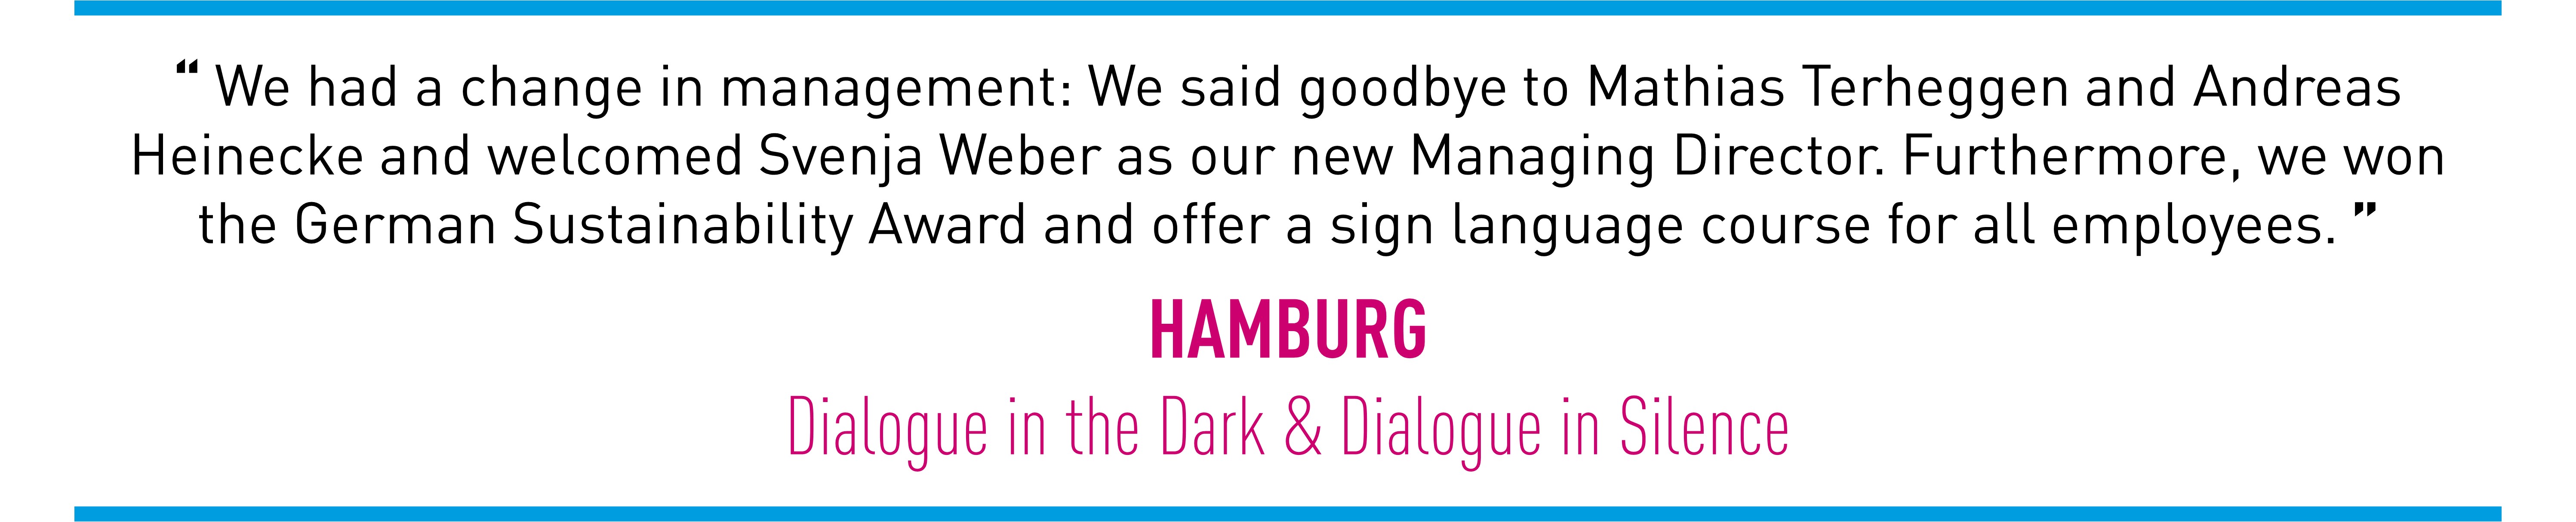 We had a change in management: We said goodbye to Mathias Terheggen and Andreas Heinecke and welcomed Svenja Weber as our new Managing Director. Furthermore, we won the German Sustainability Award and offer a sign language course for all employees.  (HAMBURG Dialogue in the Dark & Dialogue in Silence)